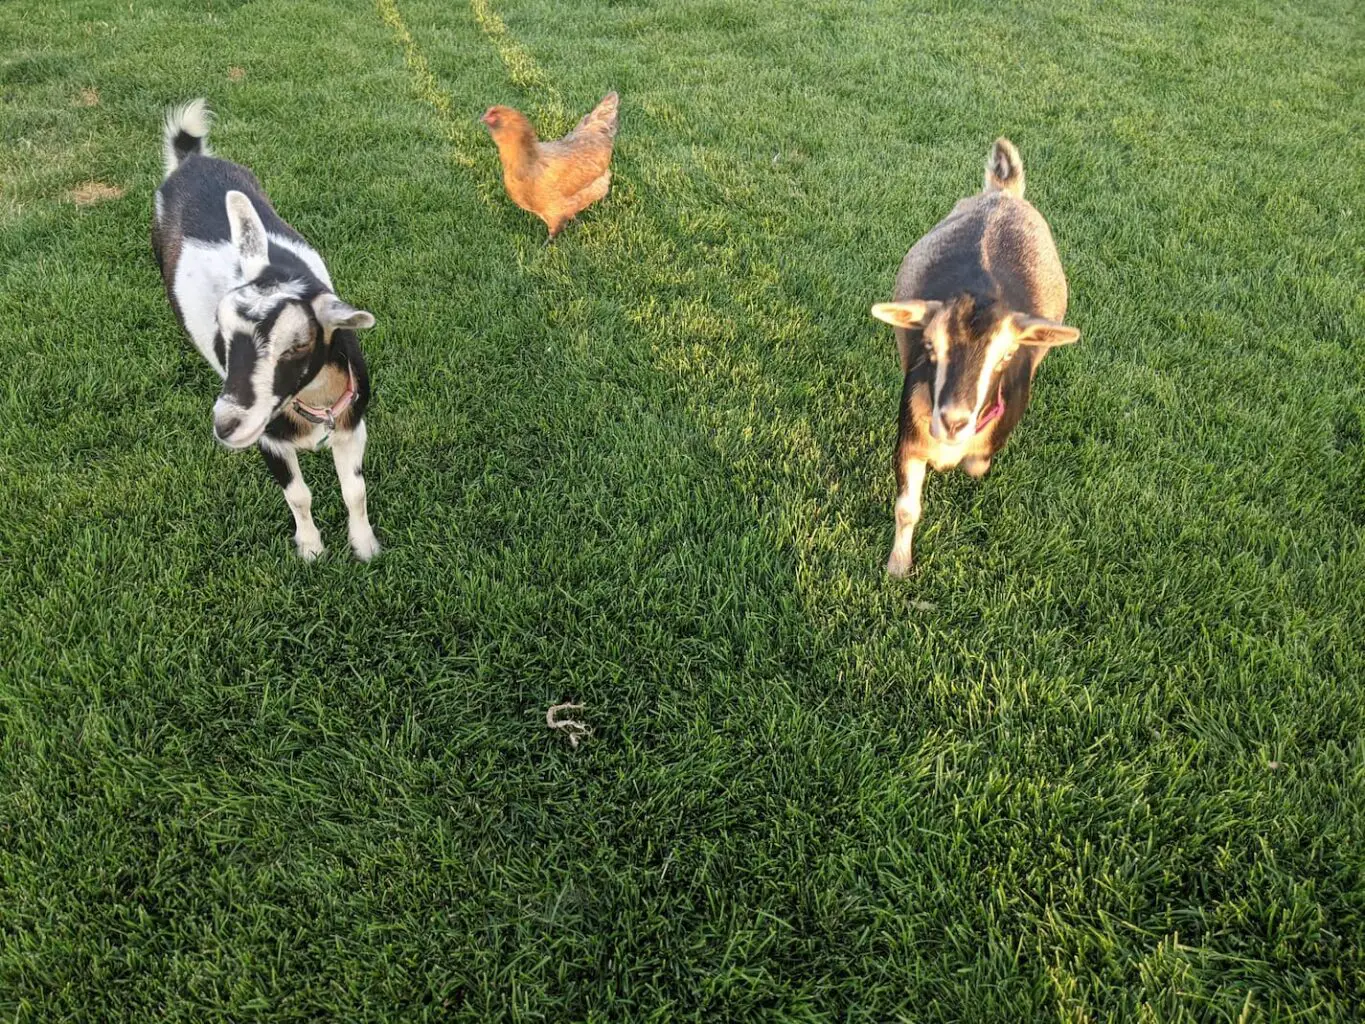 An image of our goats Clover and Katana with one of the chickens